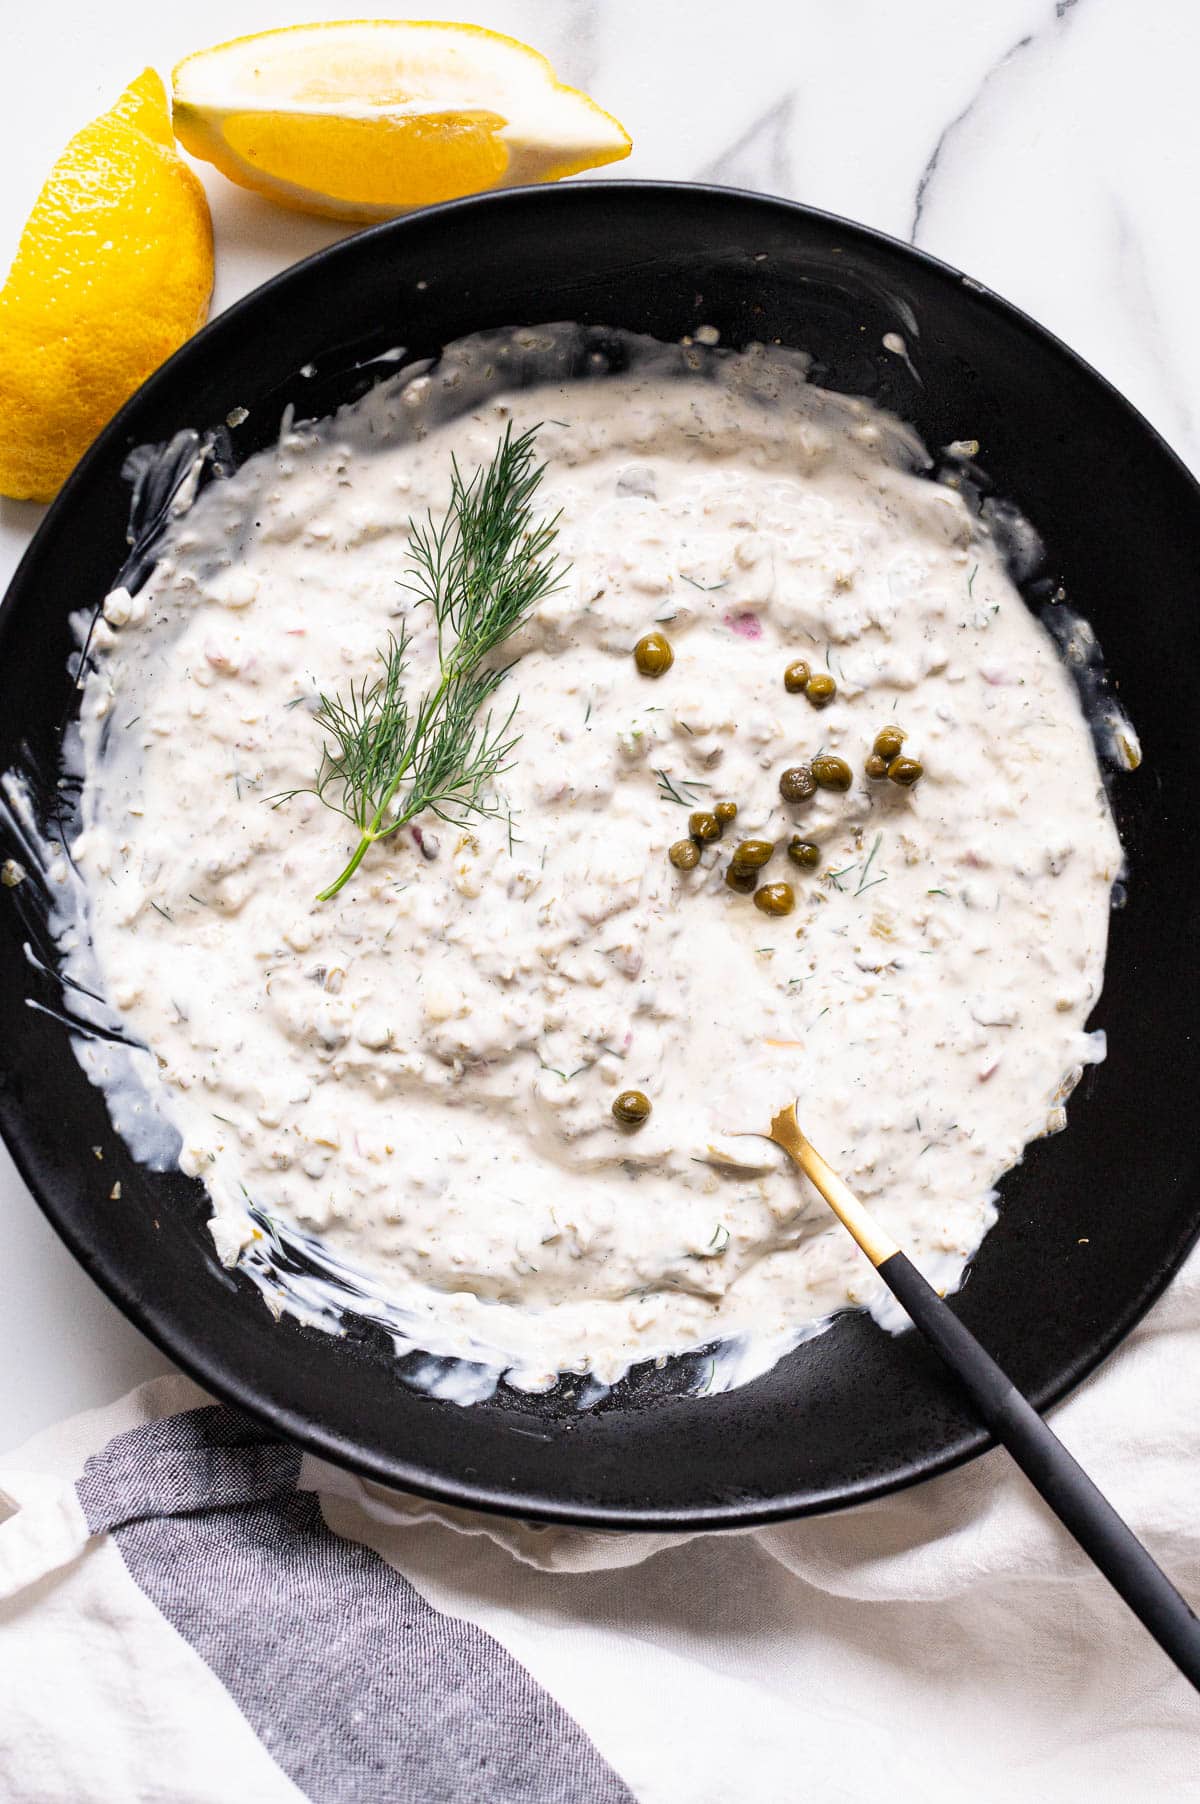 Greek yogurt tartar sauce  with capers and fresh dill in a black bowl with fork. Lemon wedges and towel on a counter.